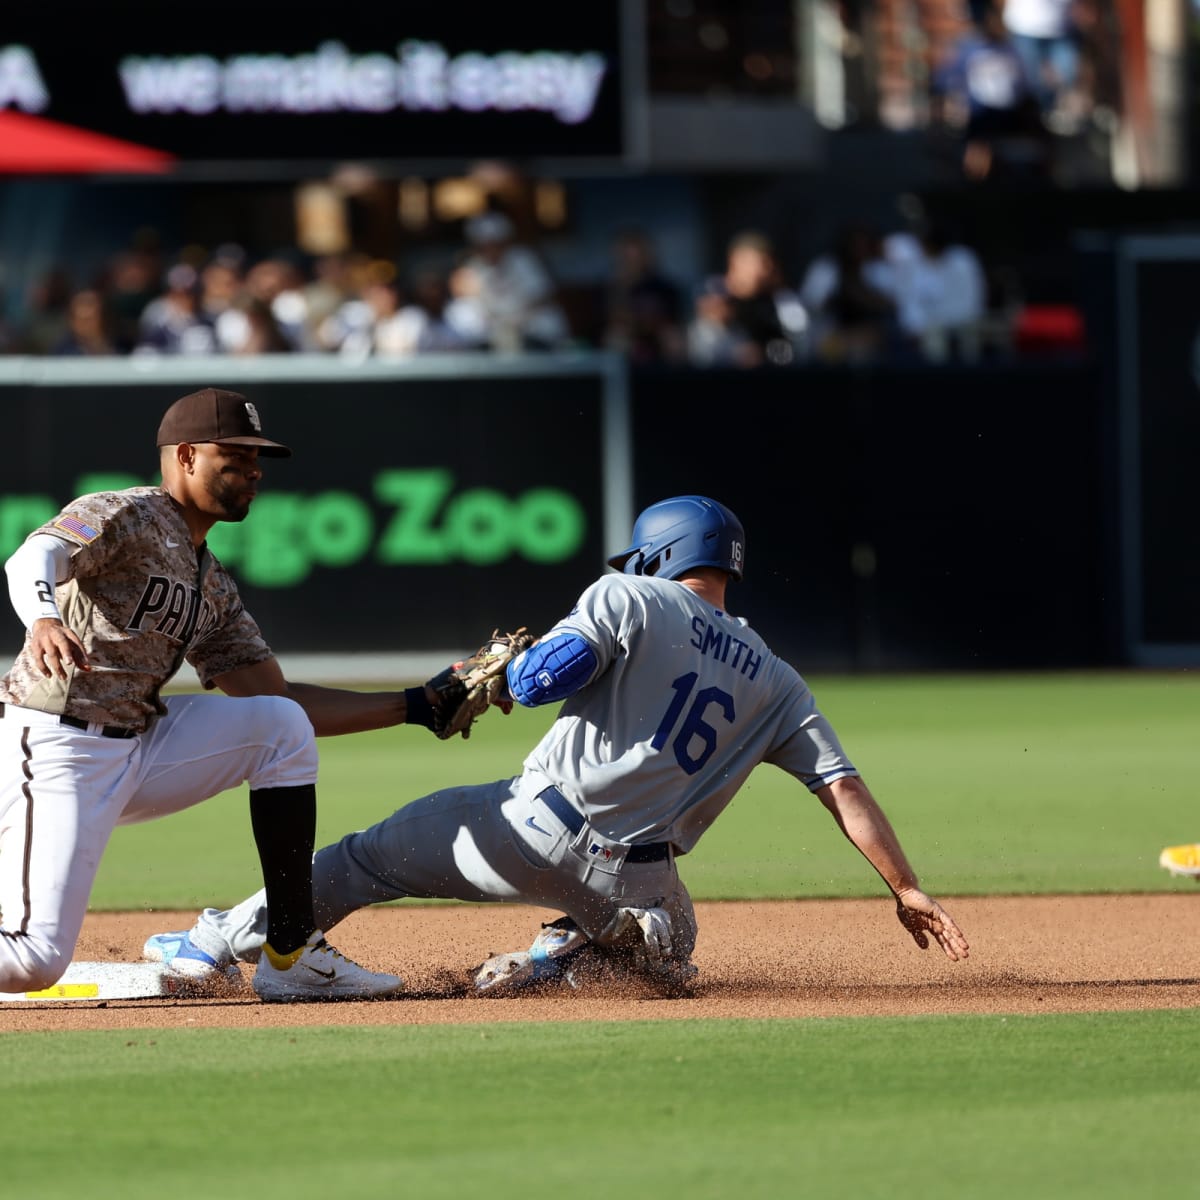 San Diego Padres: The 2022 outlook following a disappointing 2021